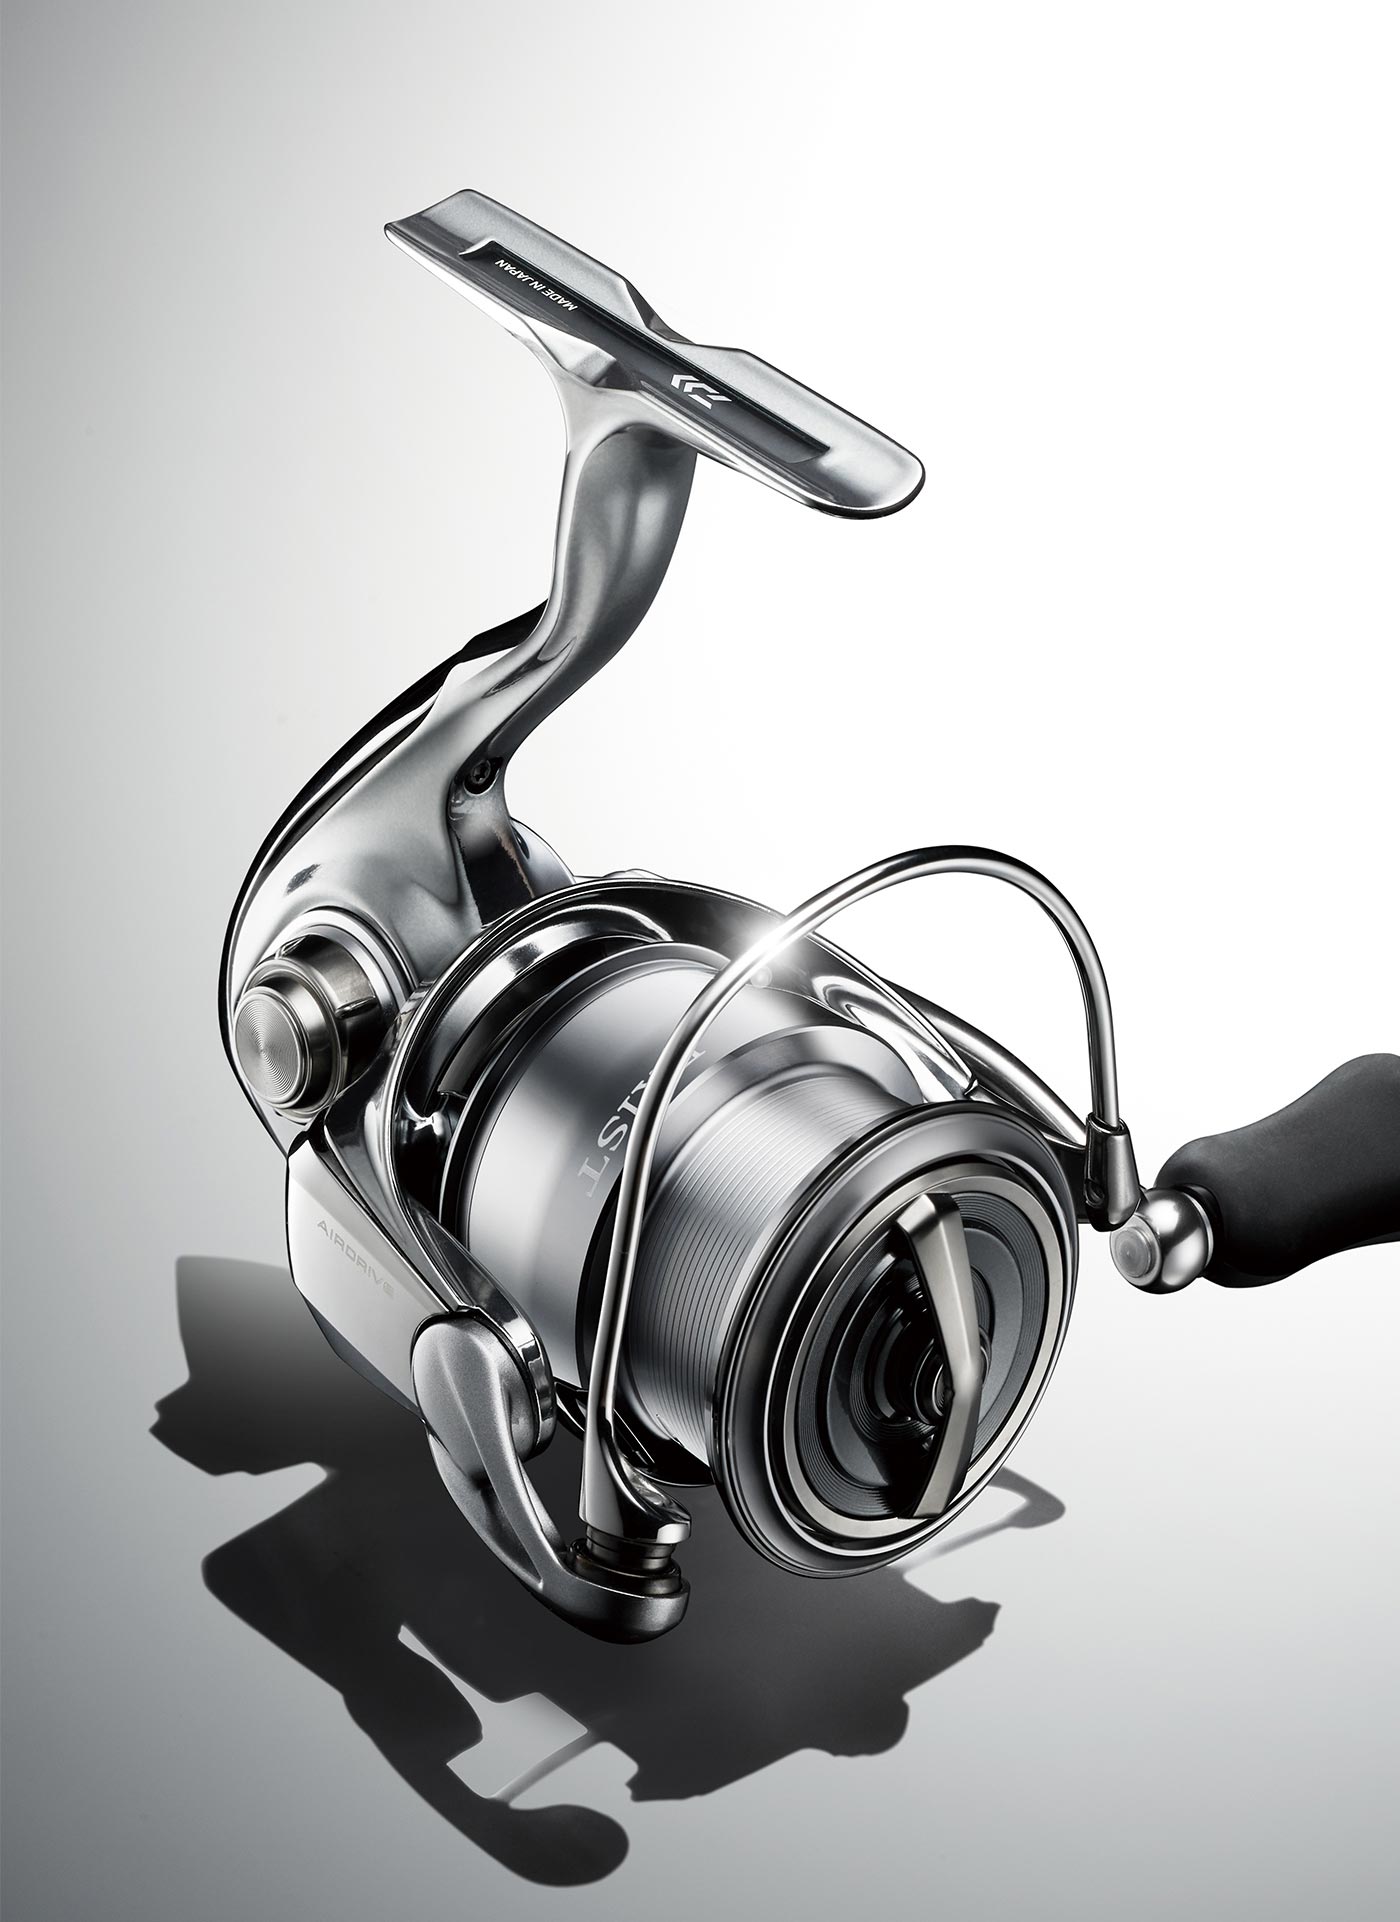 New Product: DAIWA's Flagship Spinning Reel Is Coming Back Renewed - 22  EXIST! - Japan Fishing and Tackle News